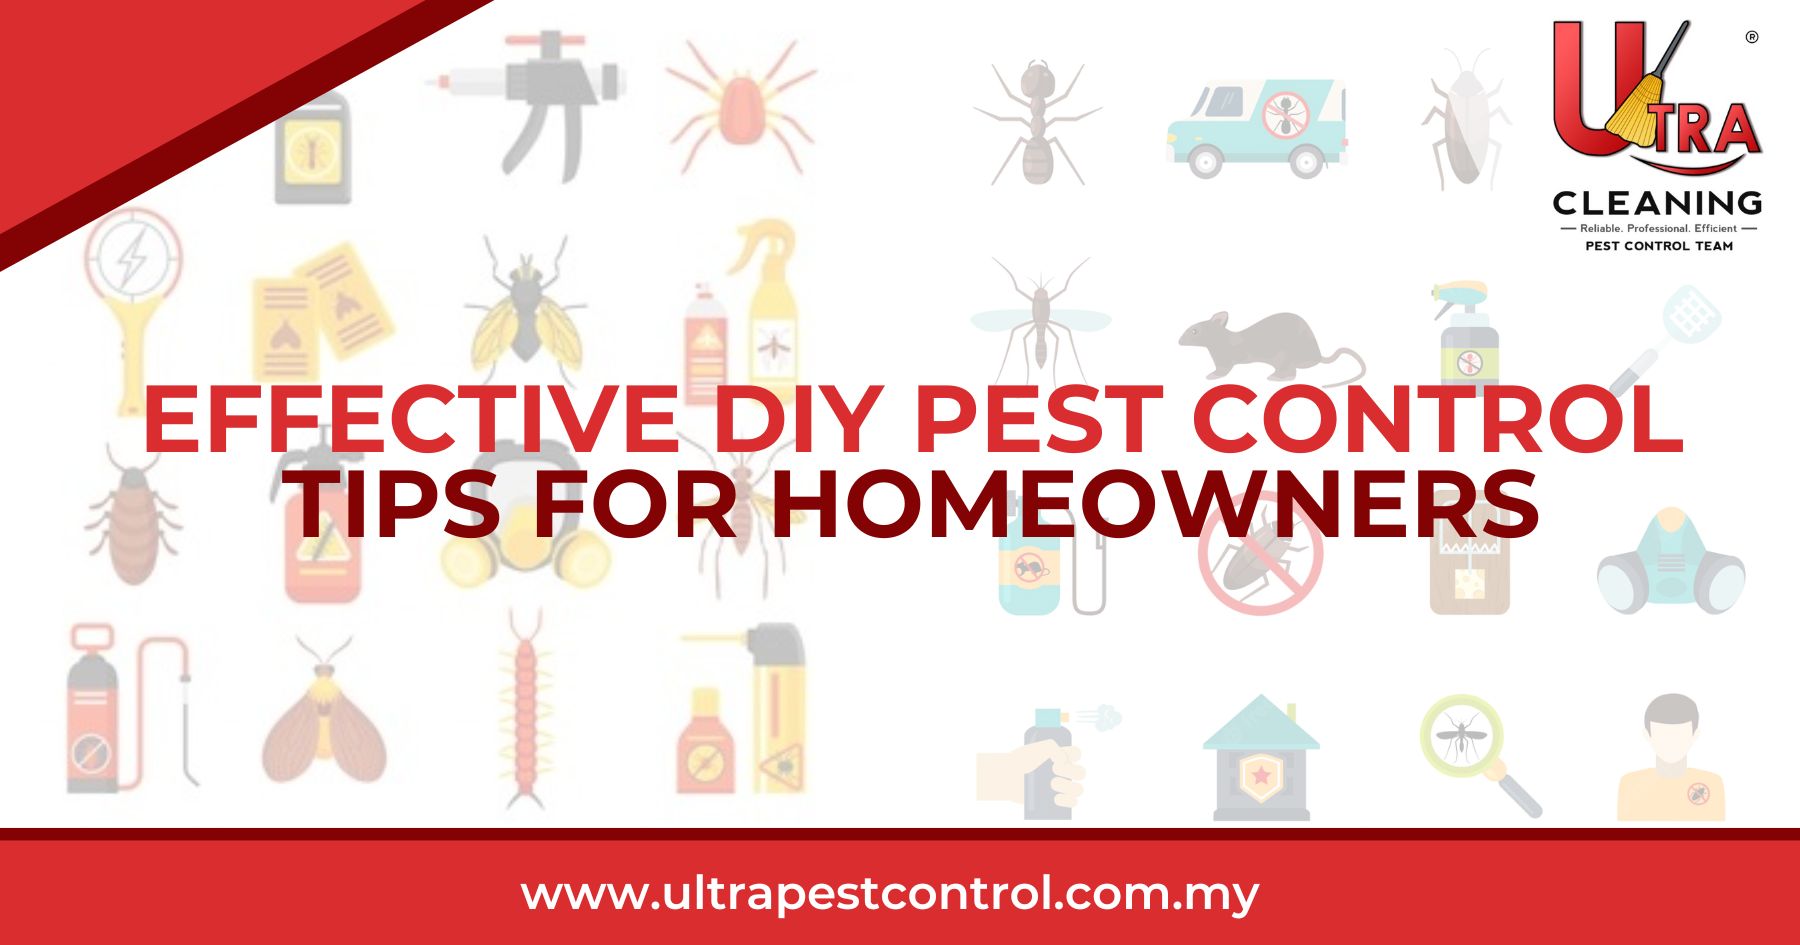 You are currently viewing Effective DIY Pest Control Tips for Homeowners